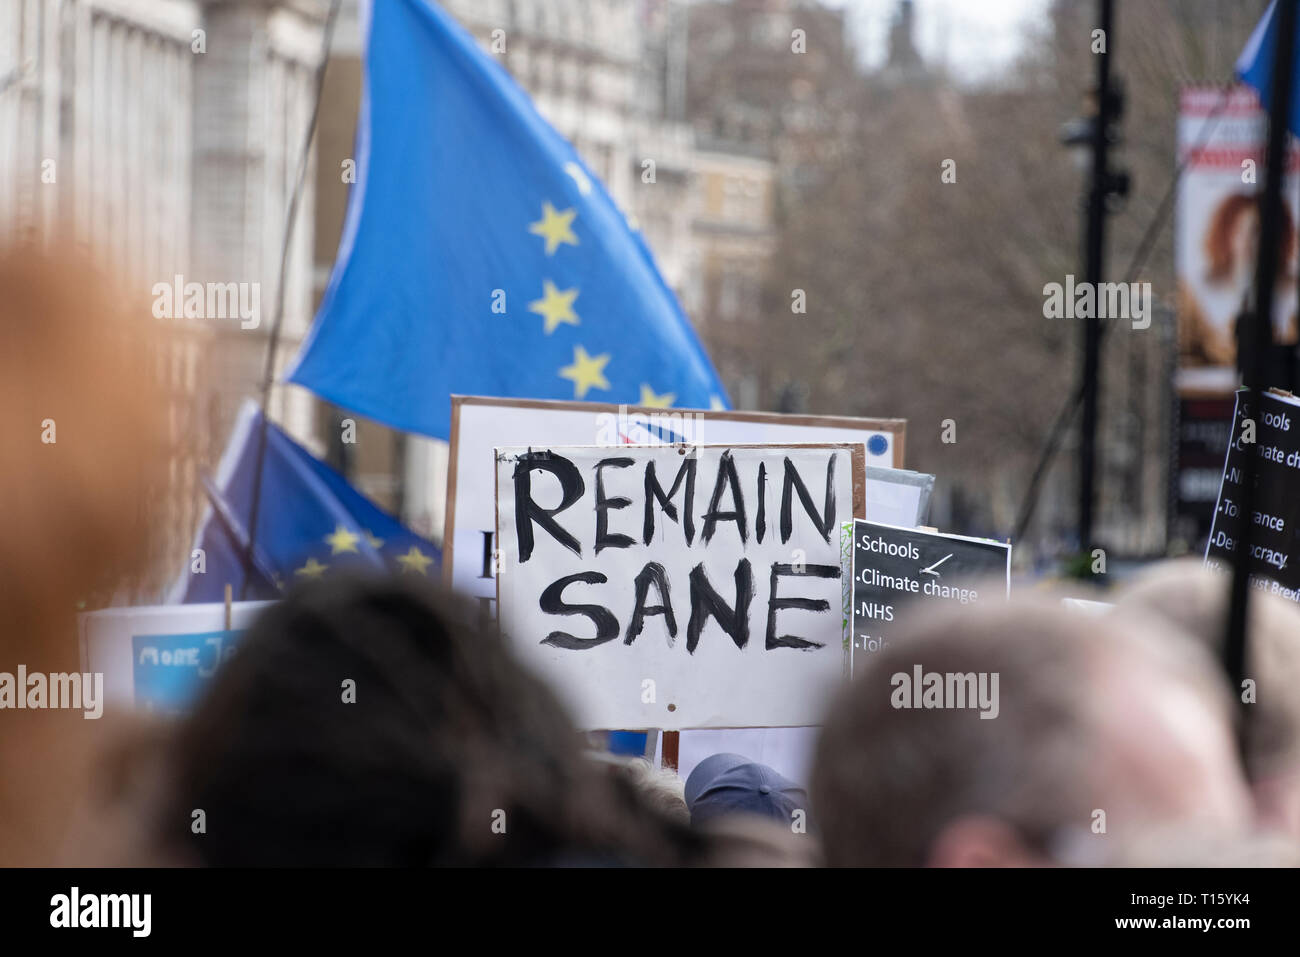 London, UK. 23rd Mar, 2019. Peoples Vote March, Remain Sane placard. Crowd detail and banners as taken from the perspective of a protester. Remain banners, second referendum. Credit: Tony Pincham/Alamy Live News Stock Photo